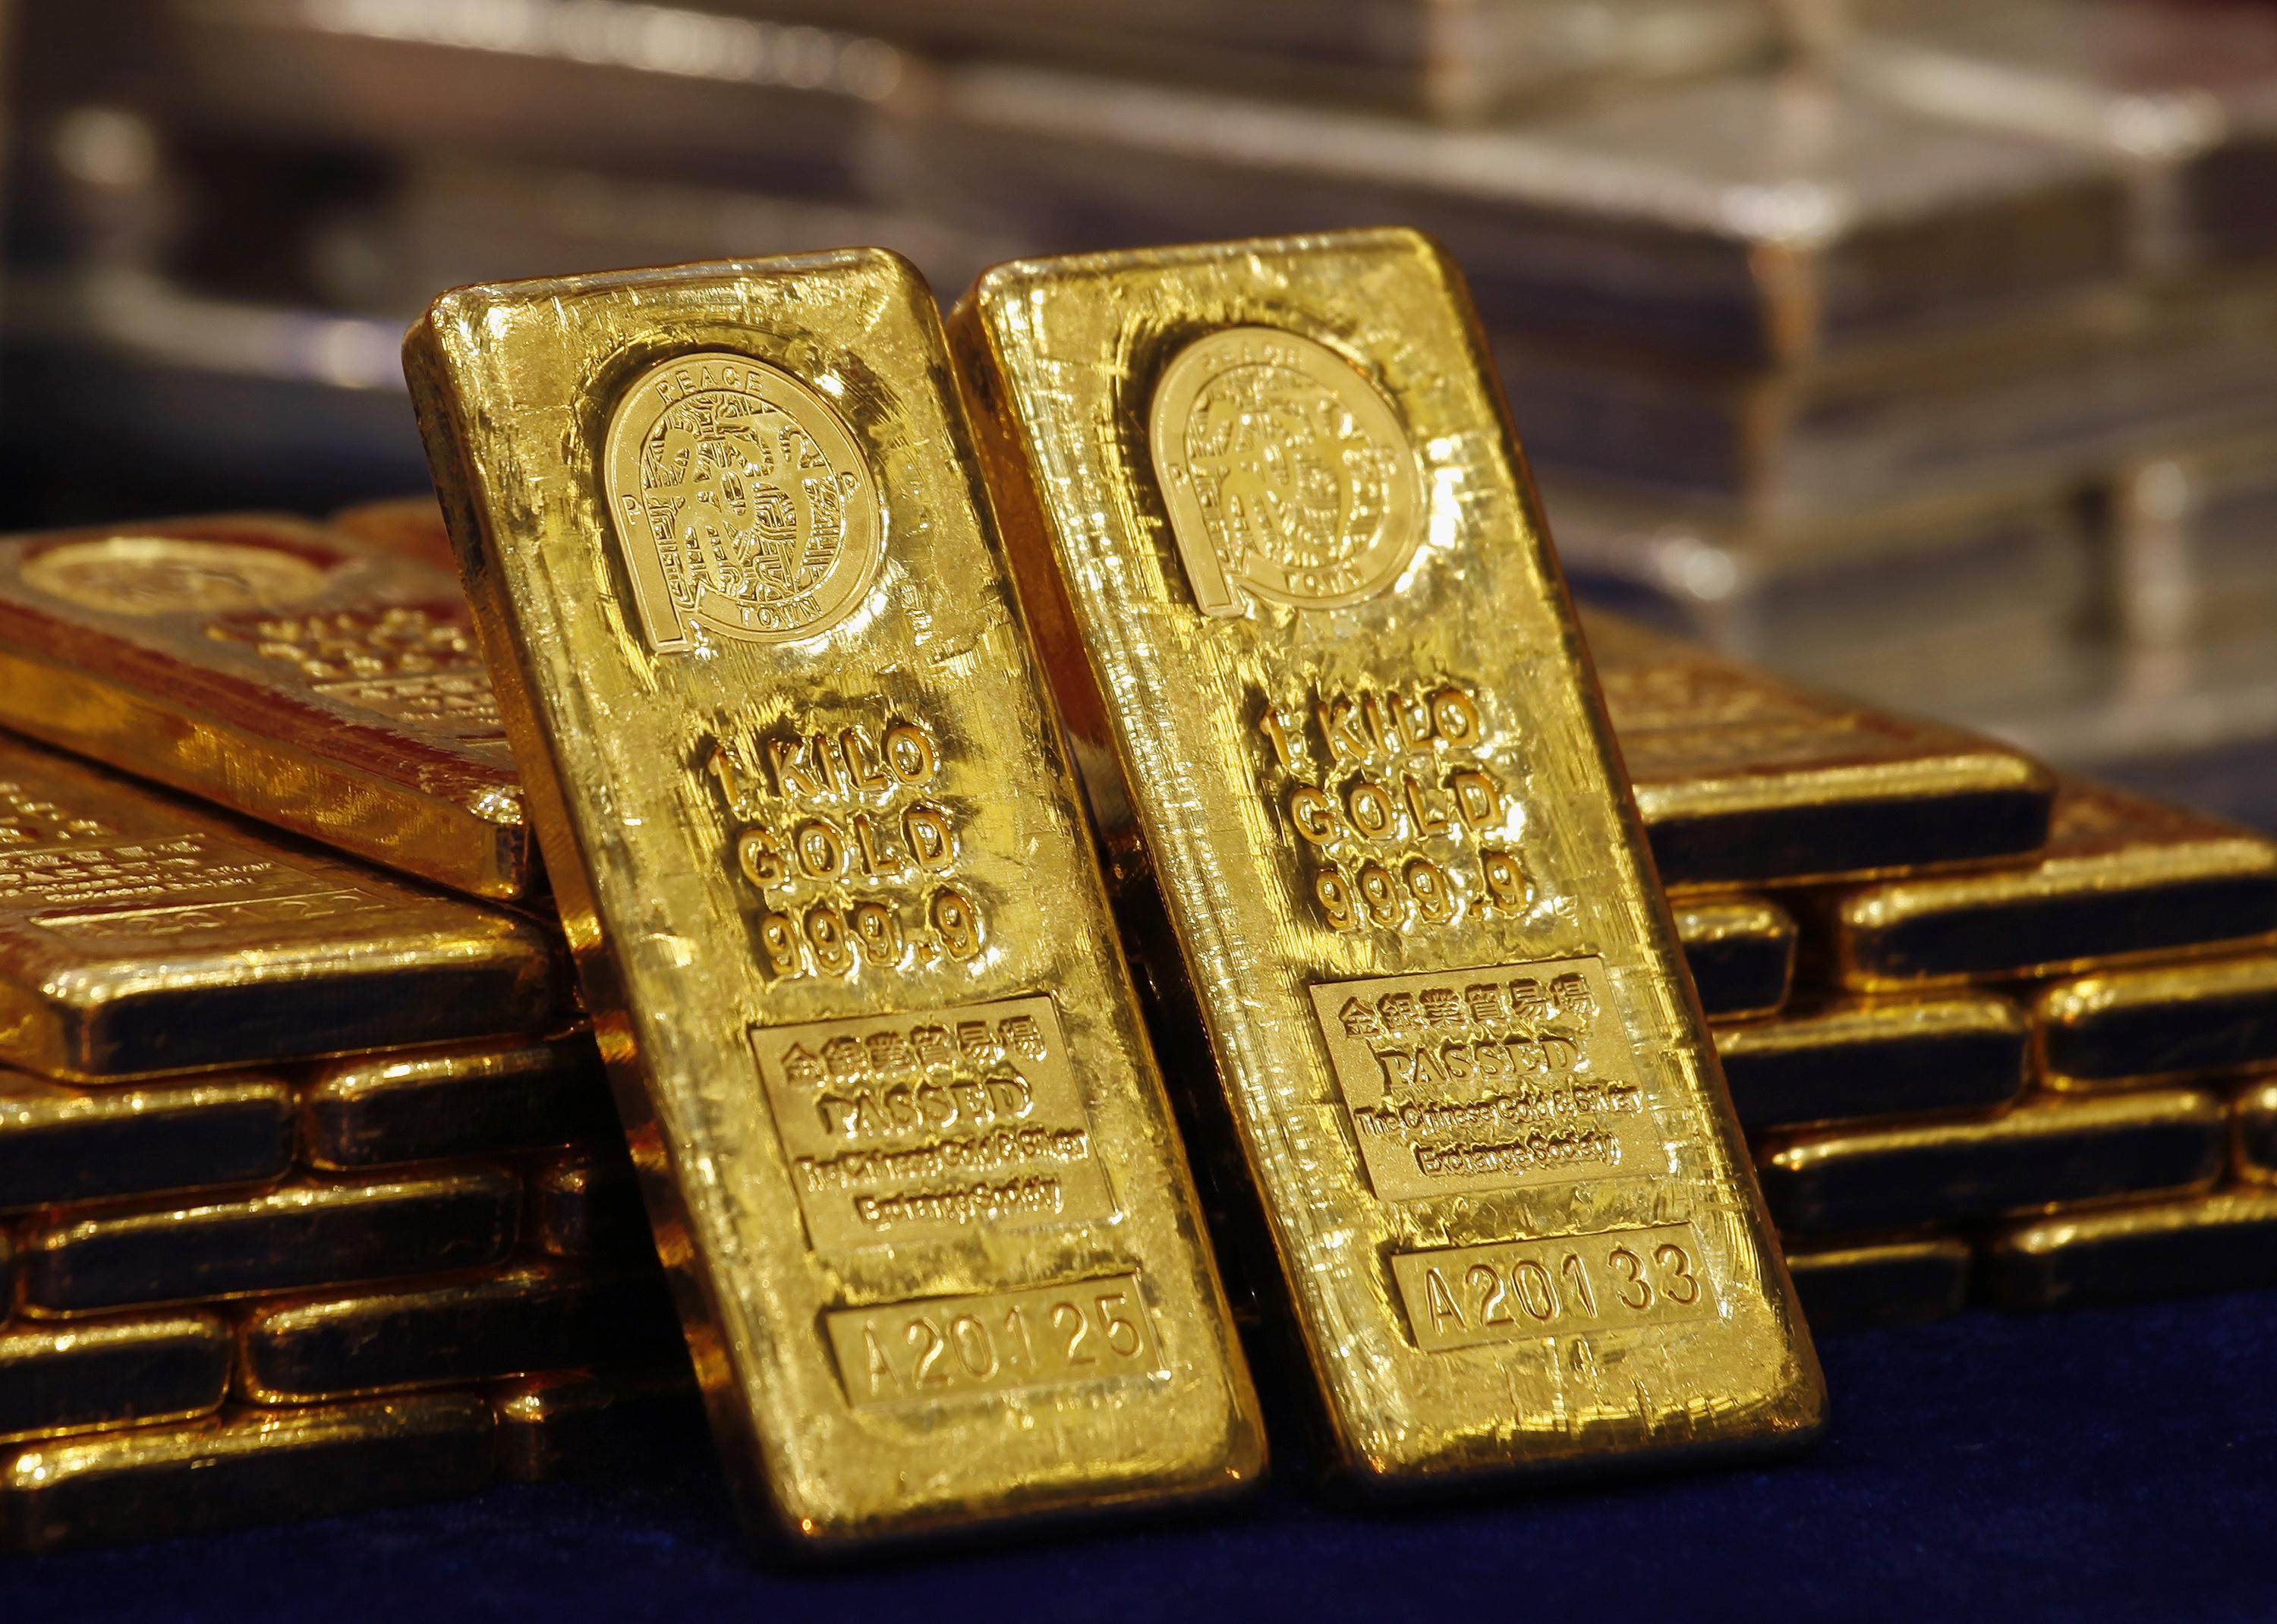 Gold rose to this year’s highest level of US$2,050.28 an ounce earlier this month and is within striking distance of the all-time peak of US$2,063.54. Photo: Reuters